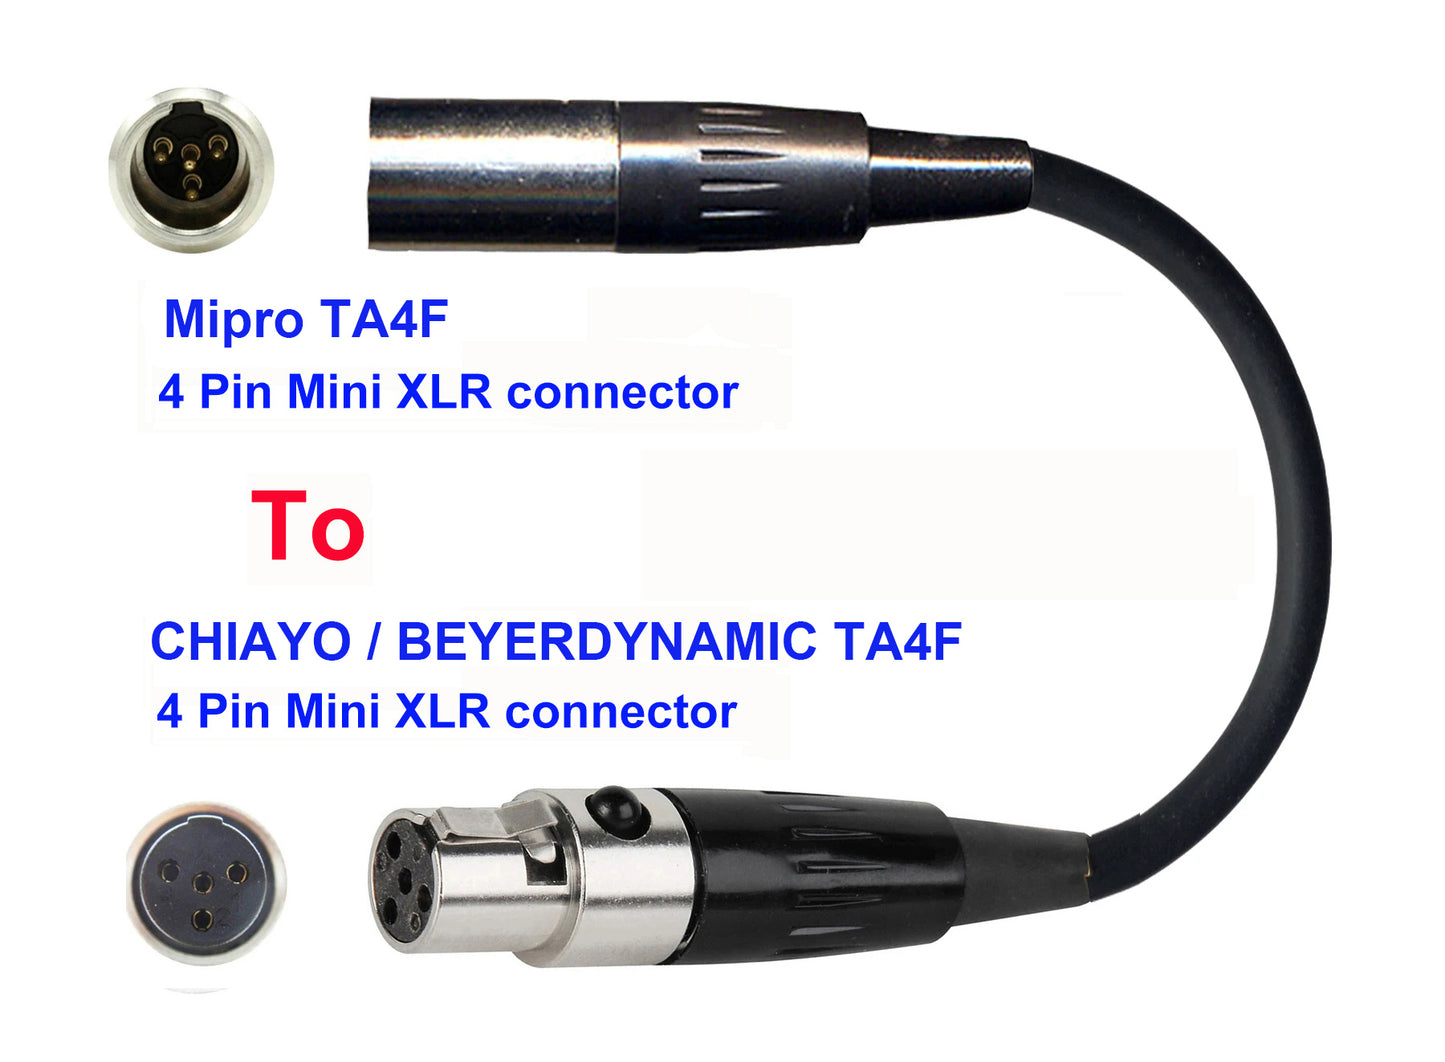 Microphone Adapter - Mipro Microphones with TA4F 4 pin mini XLR Locking connector TO Chiayo / JTS / Line6 / Beyerdynamic Transmitters with 4pin TA4M connector